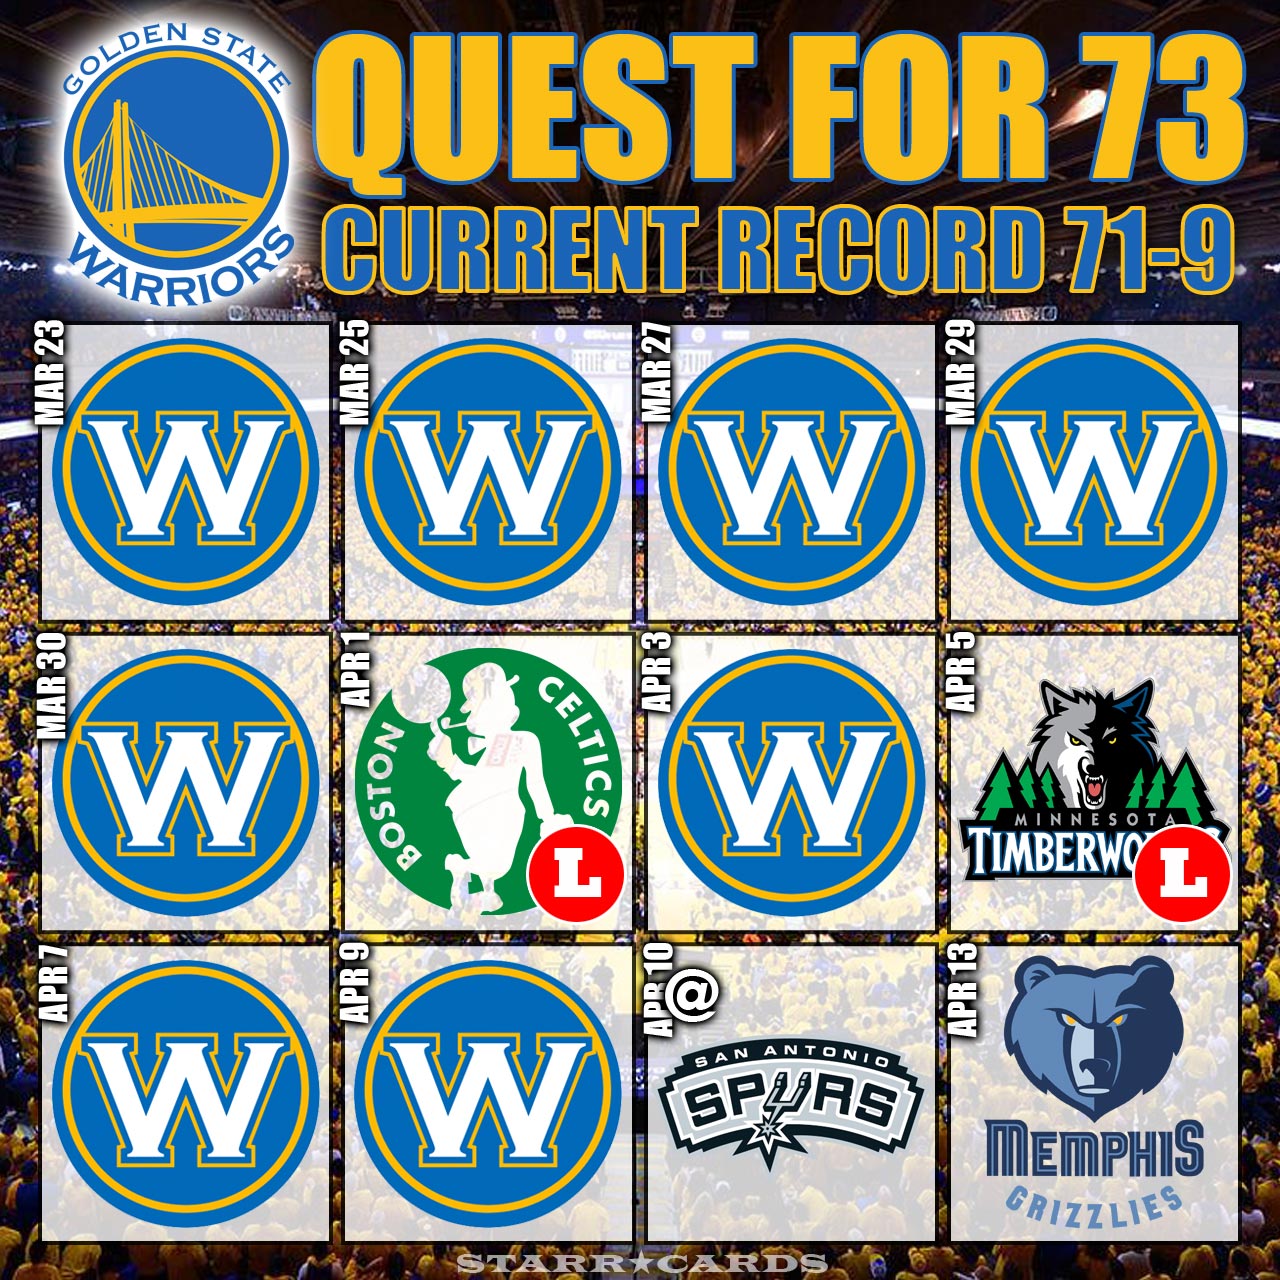 Quest for 73: Warriors move to 71-9 after slipping past Memphis Grizzlies 100-99